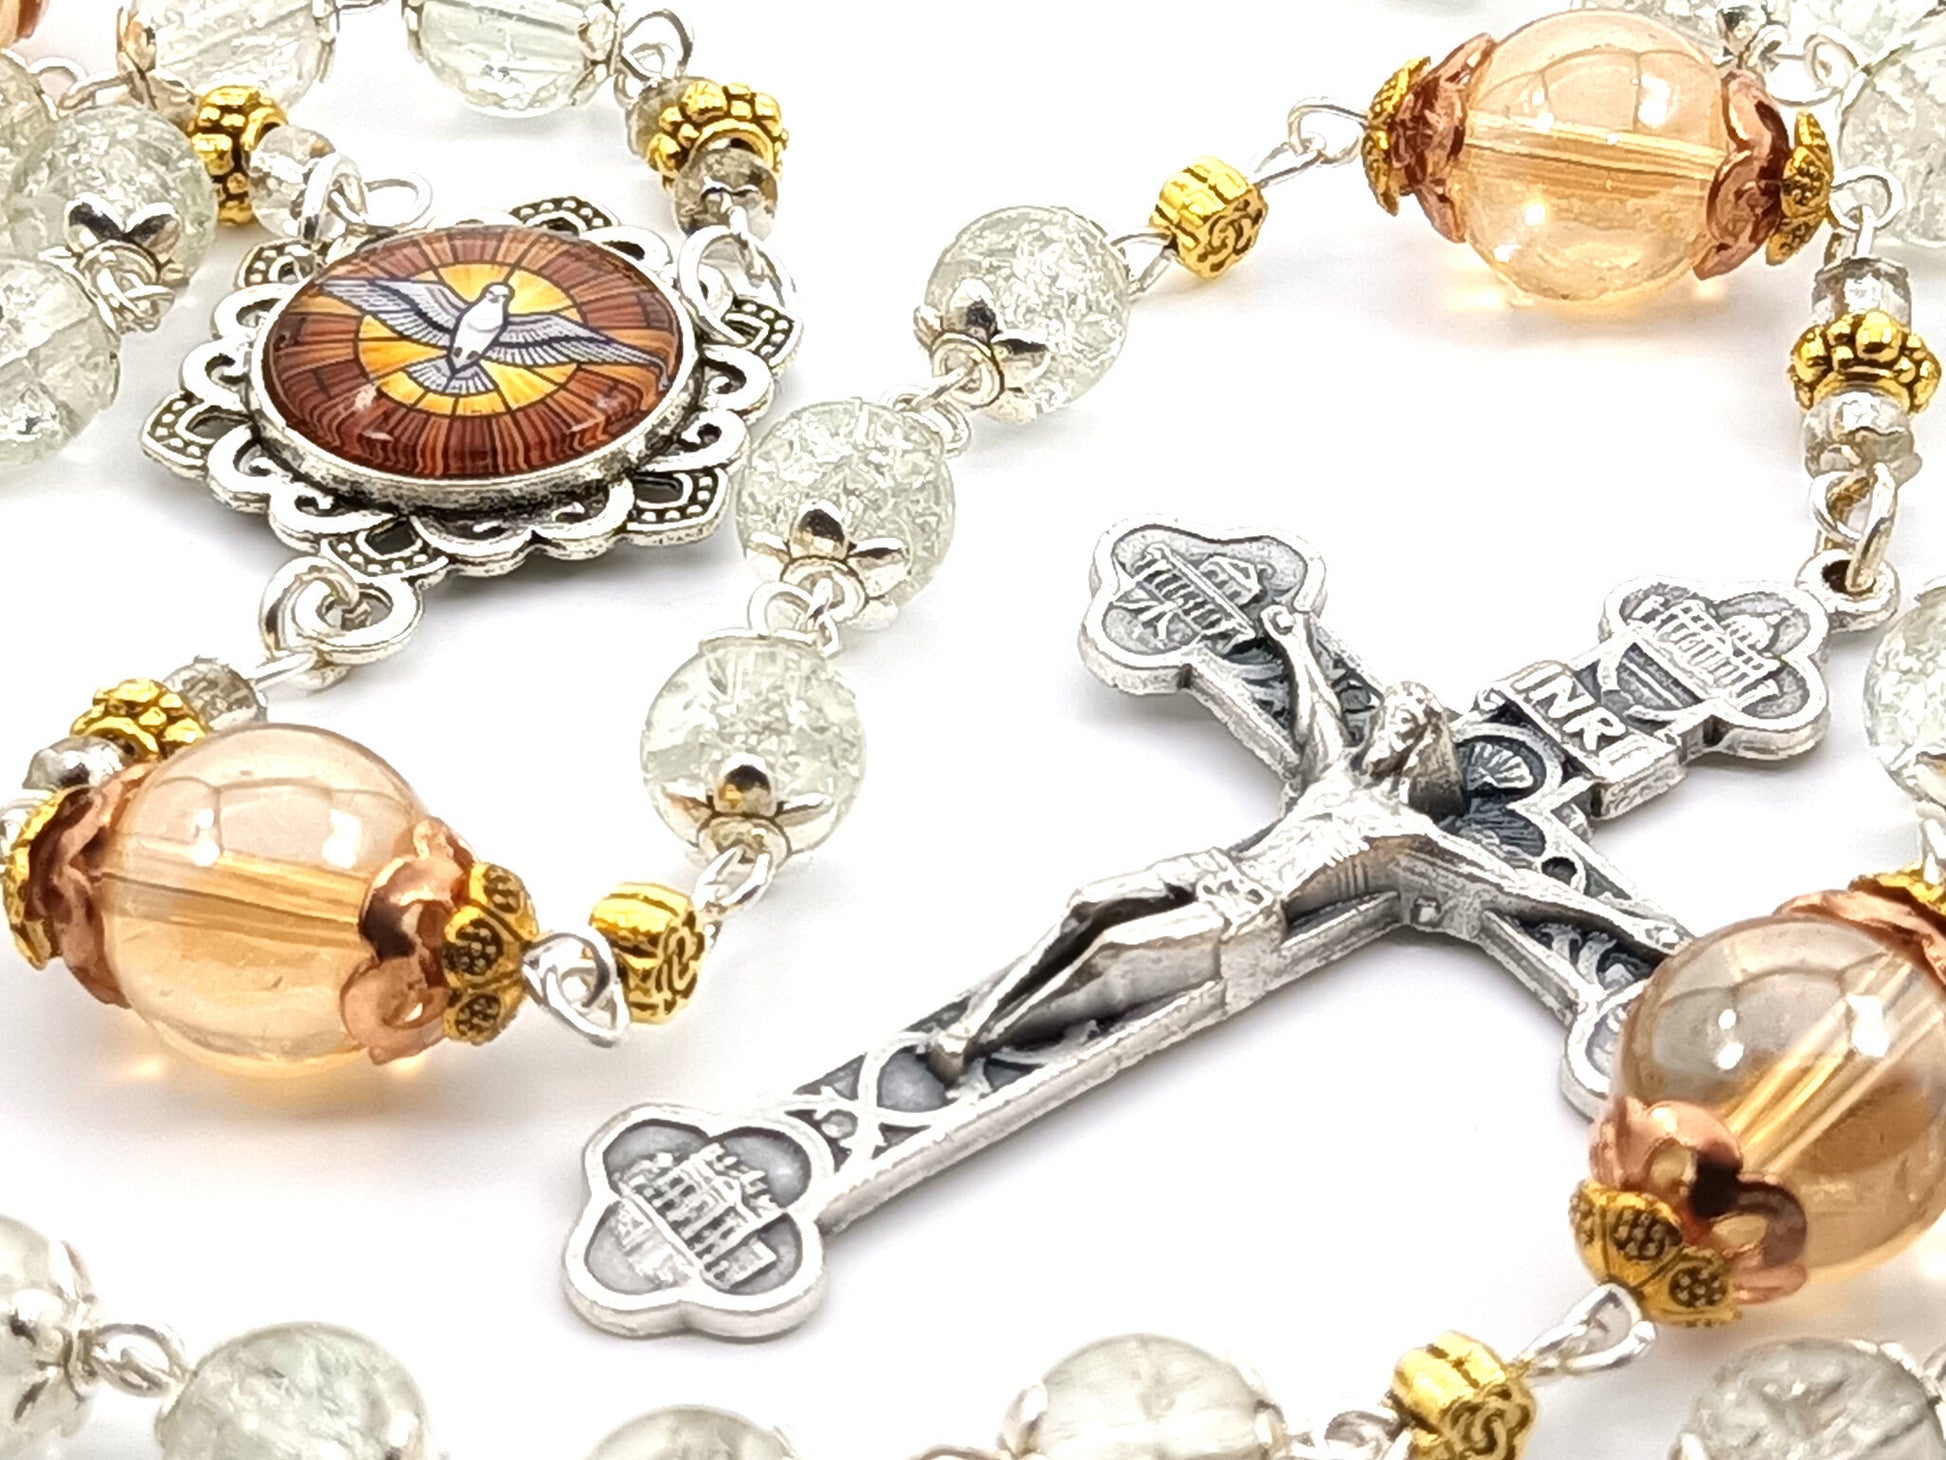 Confirmation unique rosary beads with clear and copper glass beads, Four Basilicas crucifix and silver picture Holy Spirit centre medal.